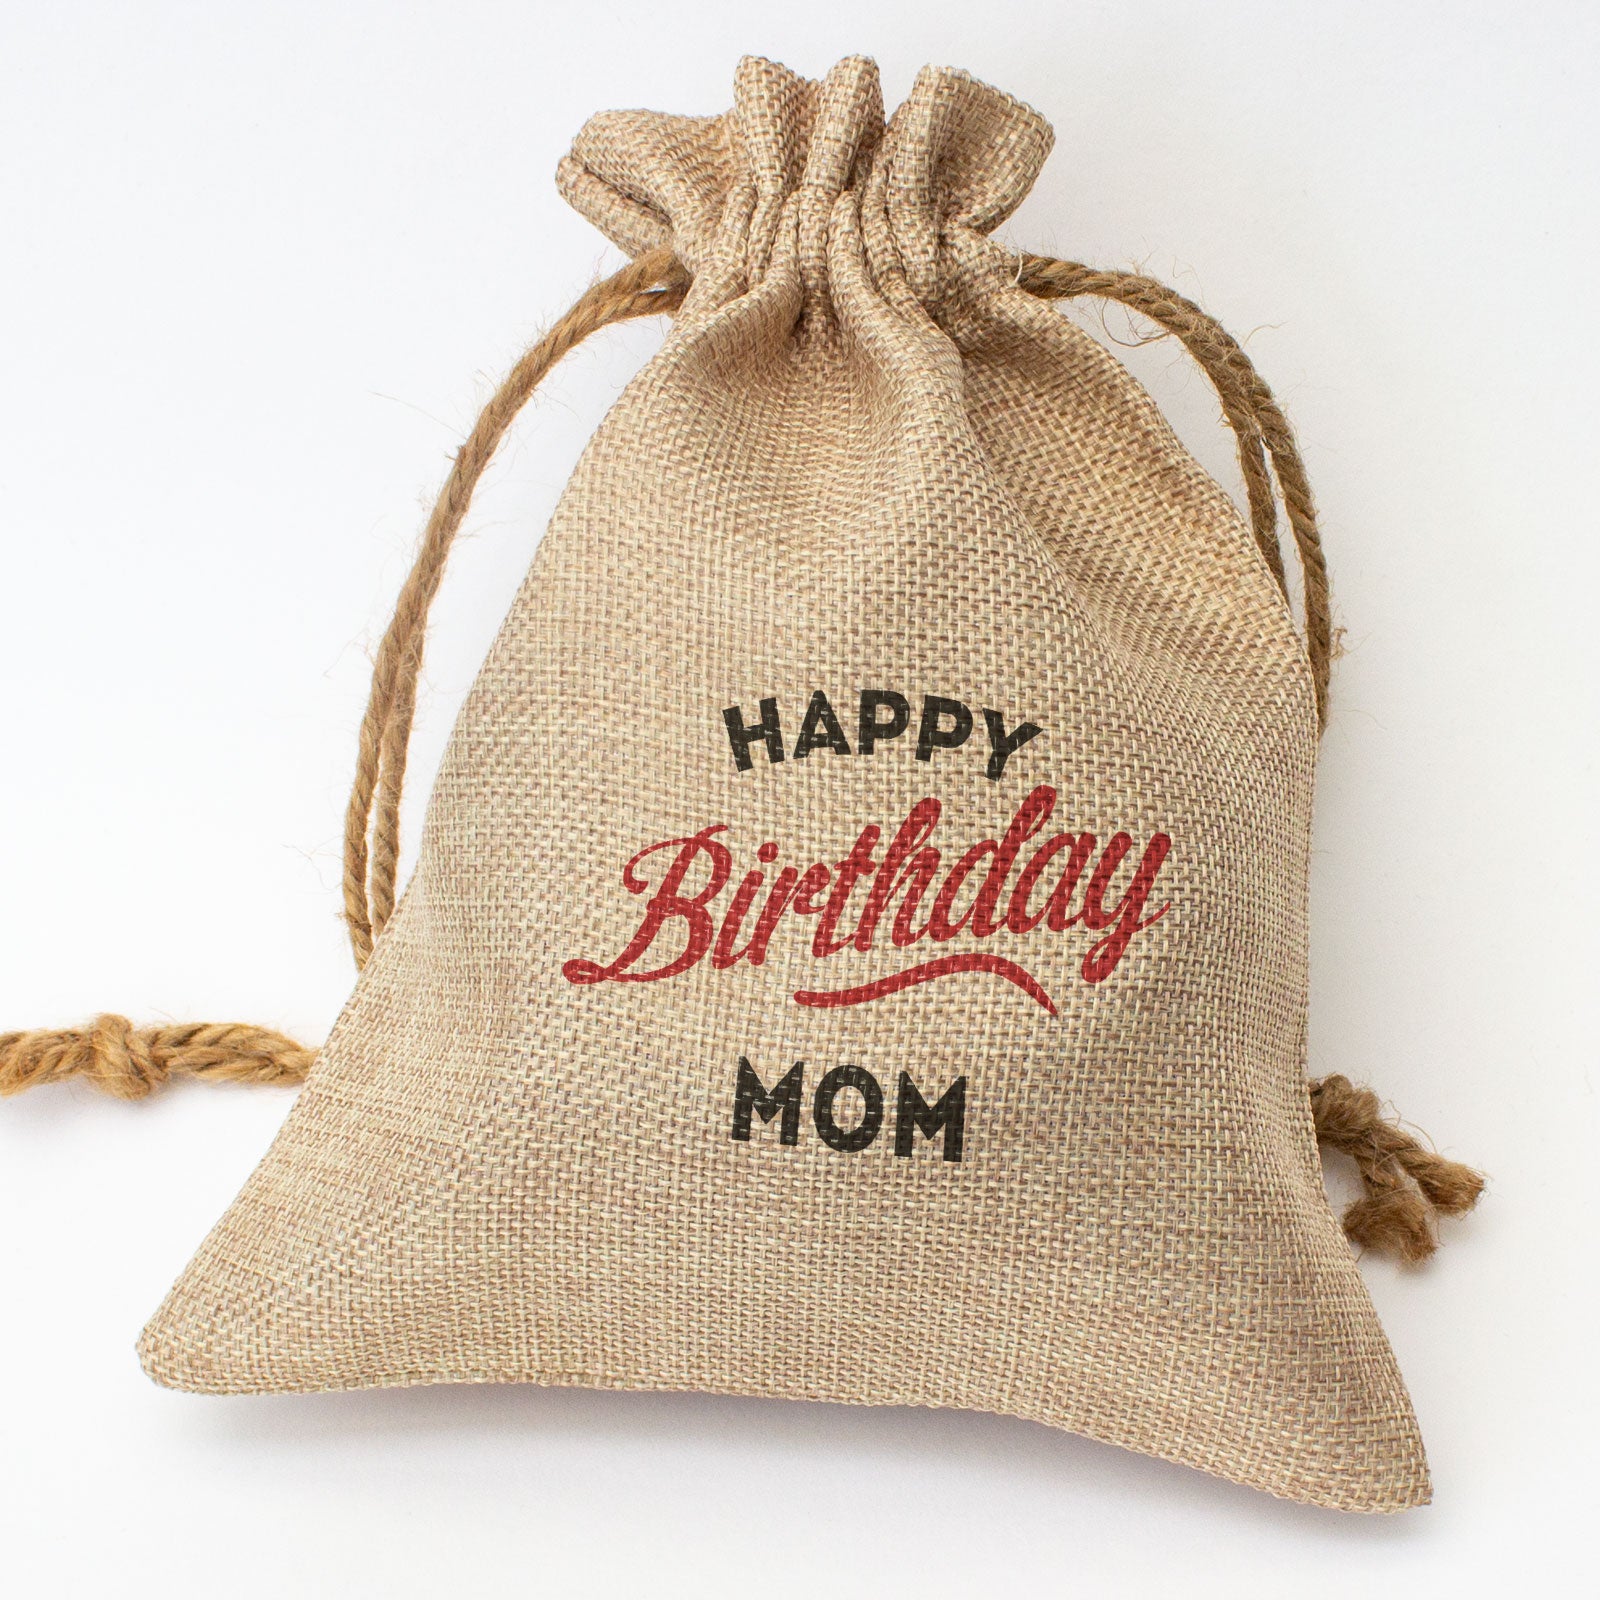 Happy Birthday Mom - Toasted Coconut Bowl Candle – Soy Wax - Gift Present